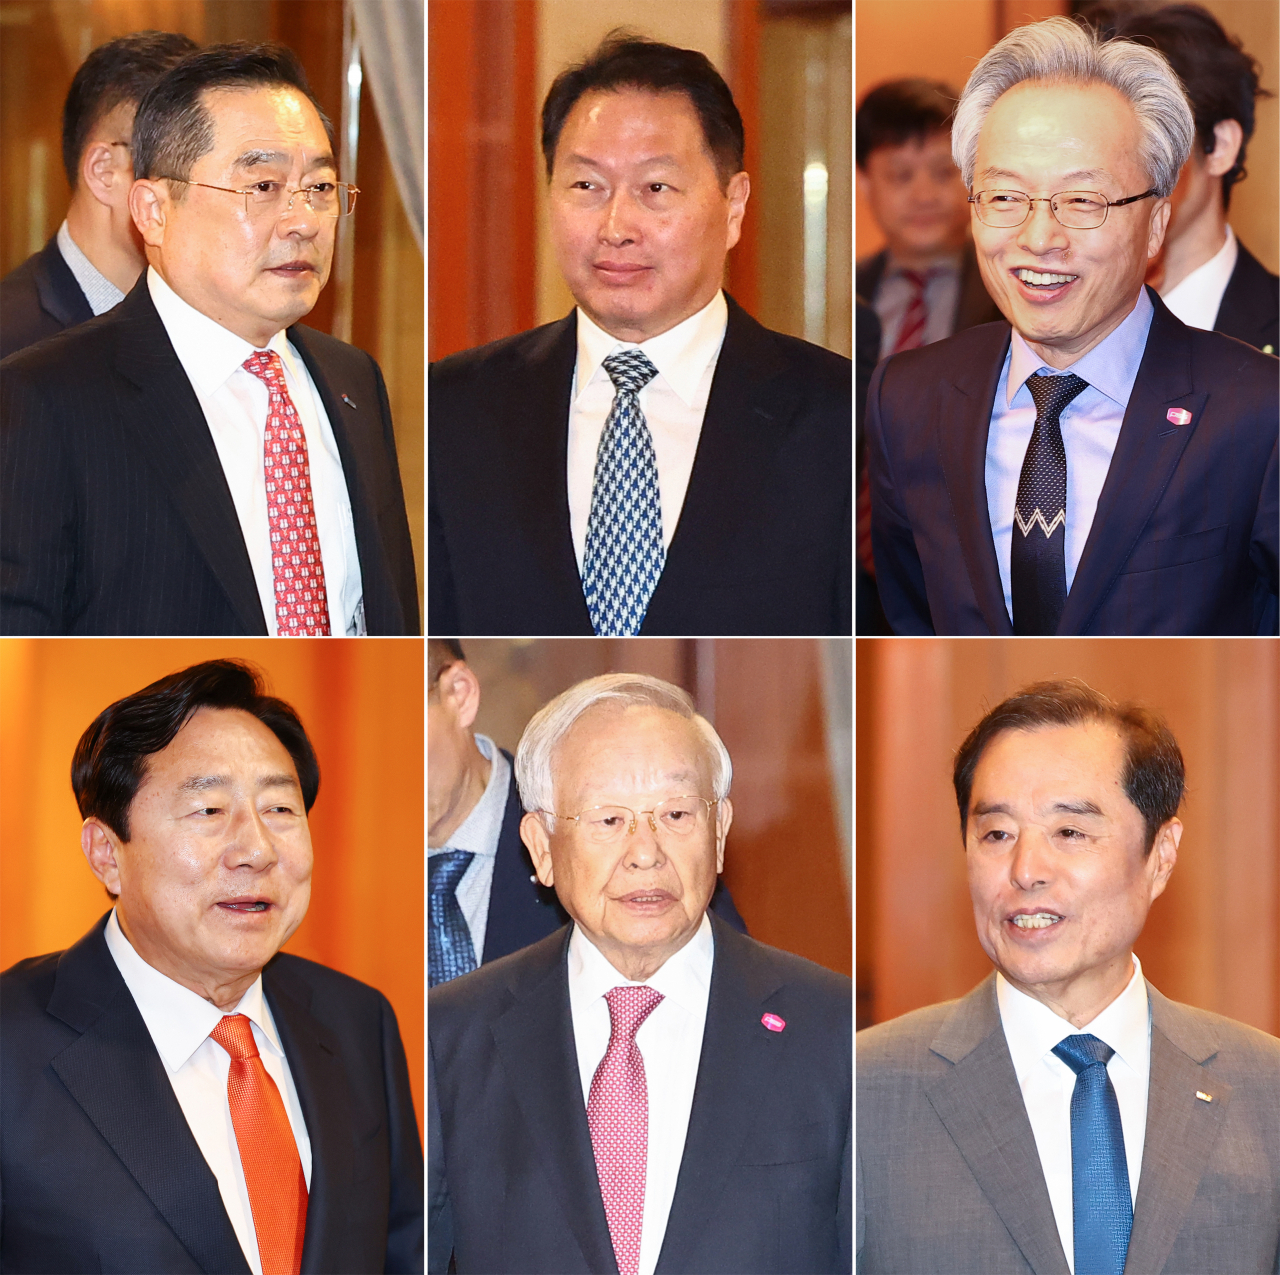 From top left: Korea International Trade Association Chairman Koo Ja-yeol; Korea Chamber of Commerce and Industry Chairman Chey Tae-won, who is also the chairman of SK Group; and Federation of Middle Market Enterprises of Korea Chairman Choi Jin-shik. From bottom left: Korea Federation of SMEs Chairman Kim Ki-moon; Korea Enterprises Federation Chairman Sohn Kyung-shik; and Federation of Korean Industries Acting Chairman Kim Byong-joon. (Yonhap)